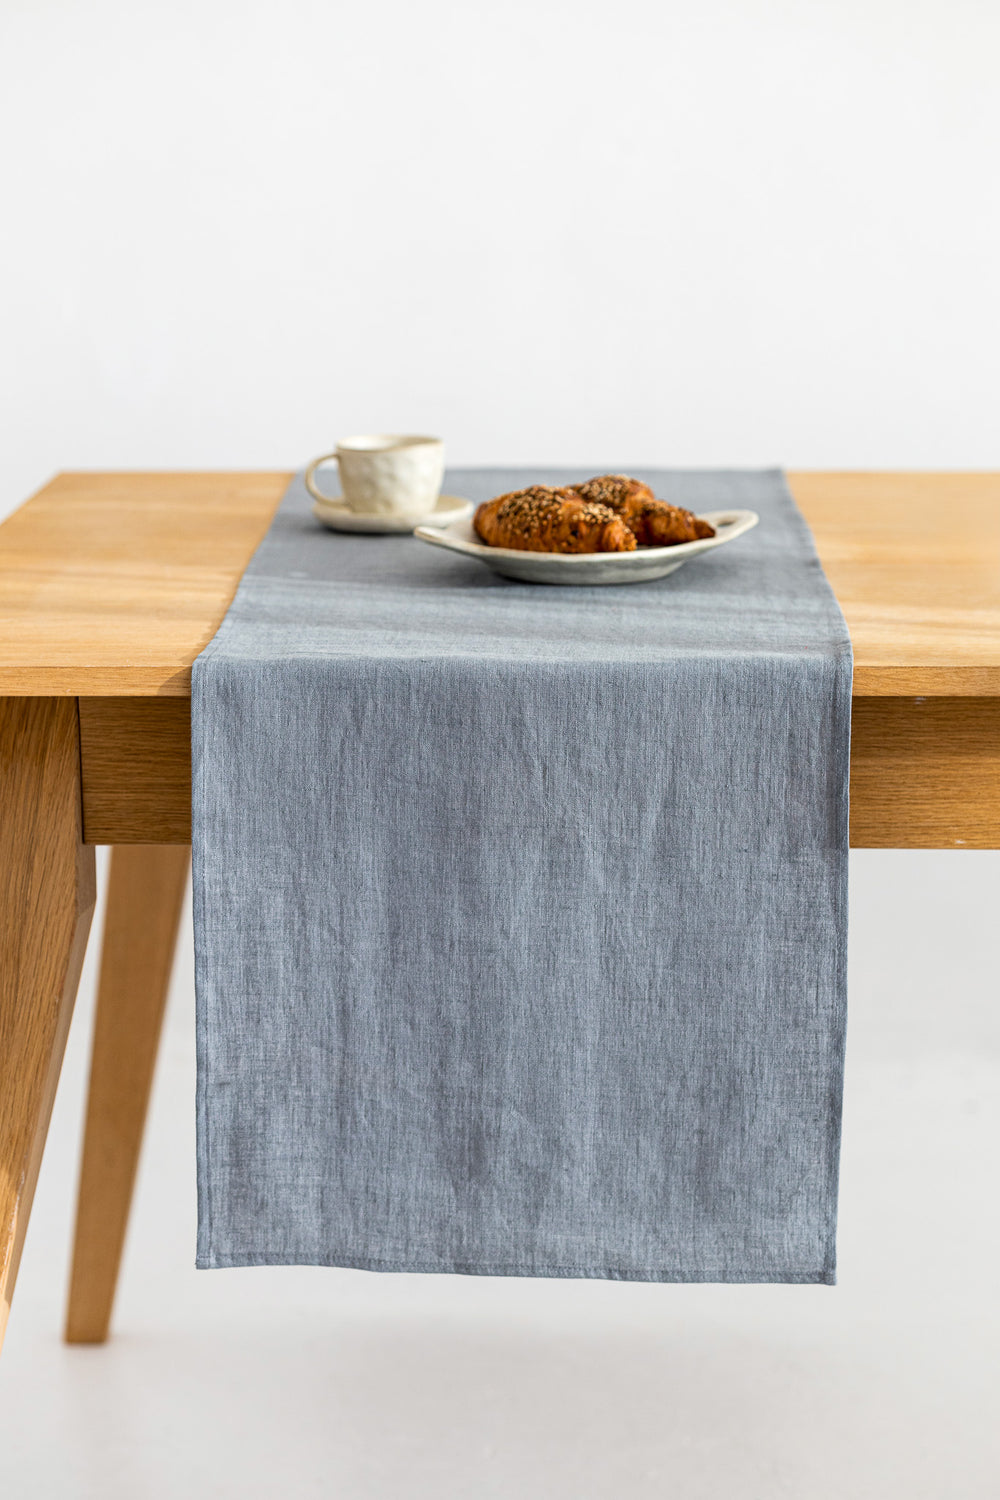 Linen Table Runner On Table In Grey Color 1 - Daily Linen